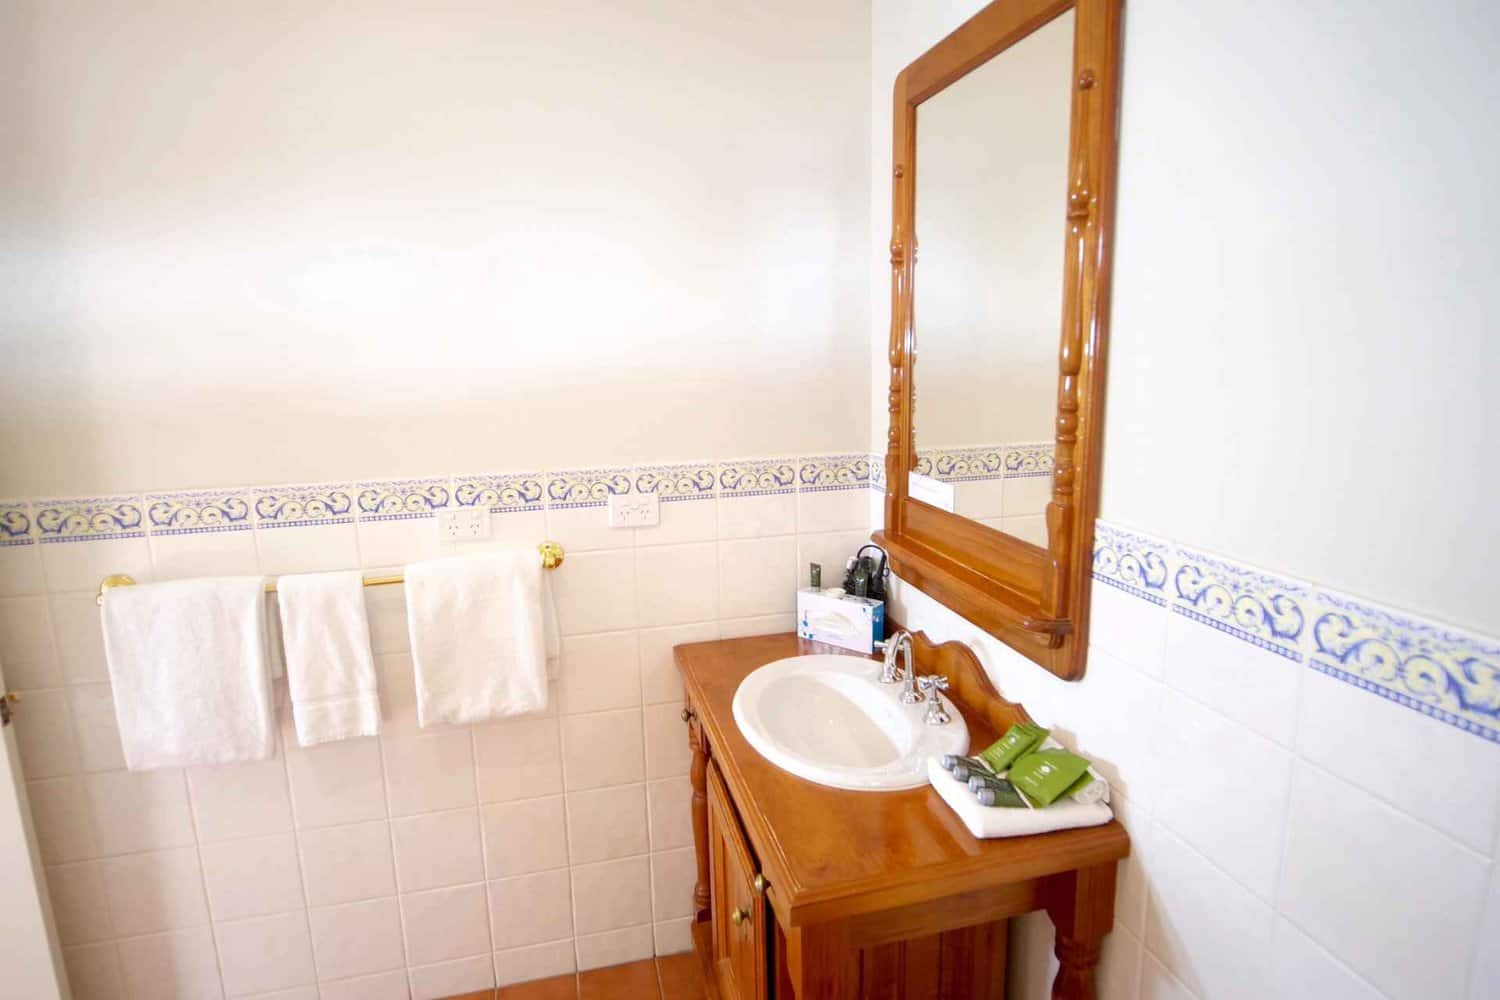 A bright, clean bathroom with white walls and a wooden vanity that holds a sink with a silver faucet. Above the vanity is a large wooden-framed mirror, and on the wall, there is a row of decorative blue and white tiles. White towels hang neatly on a rail to the left of the vanity.